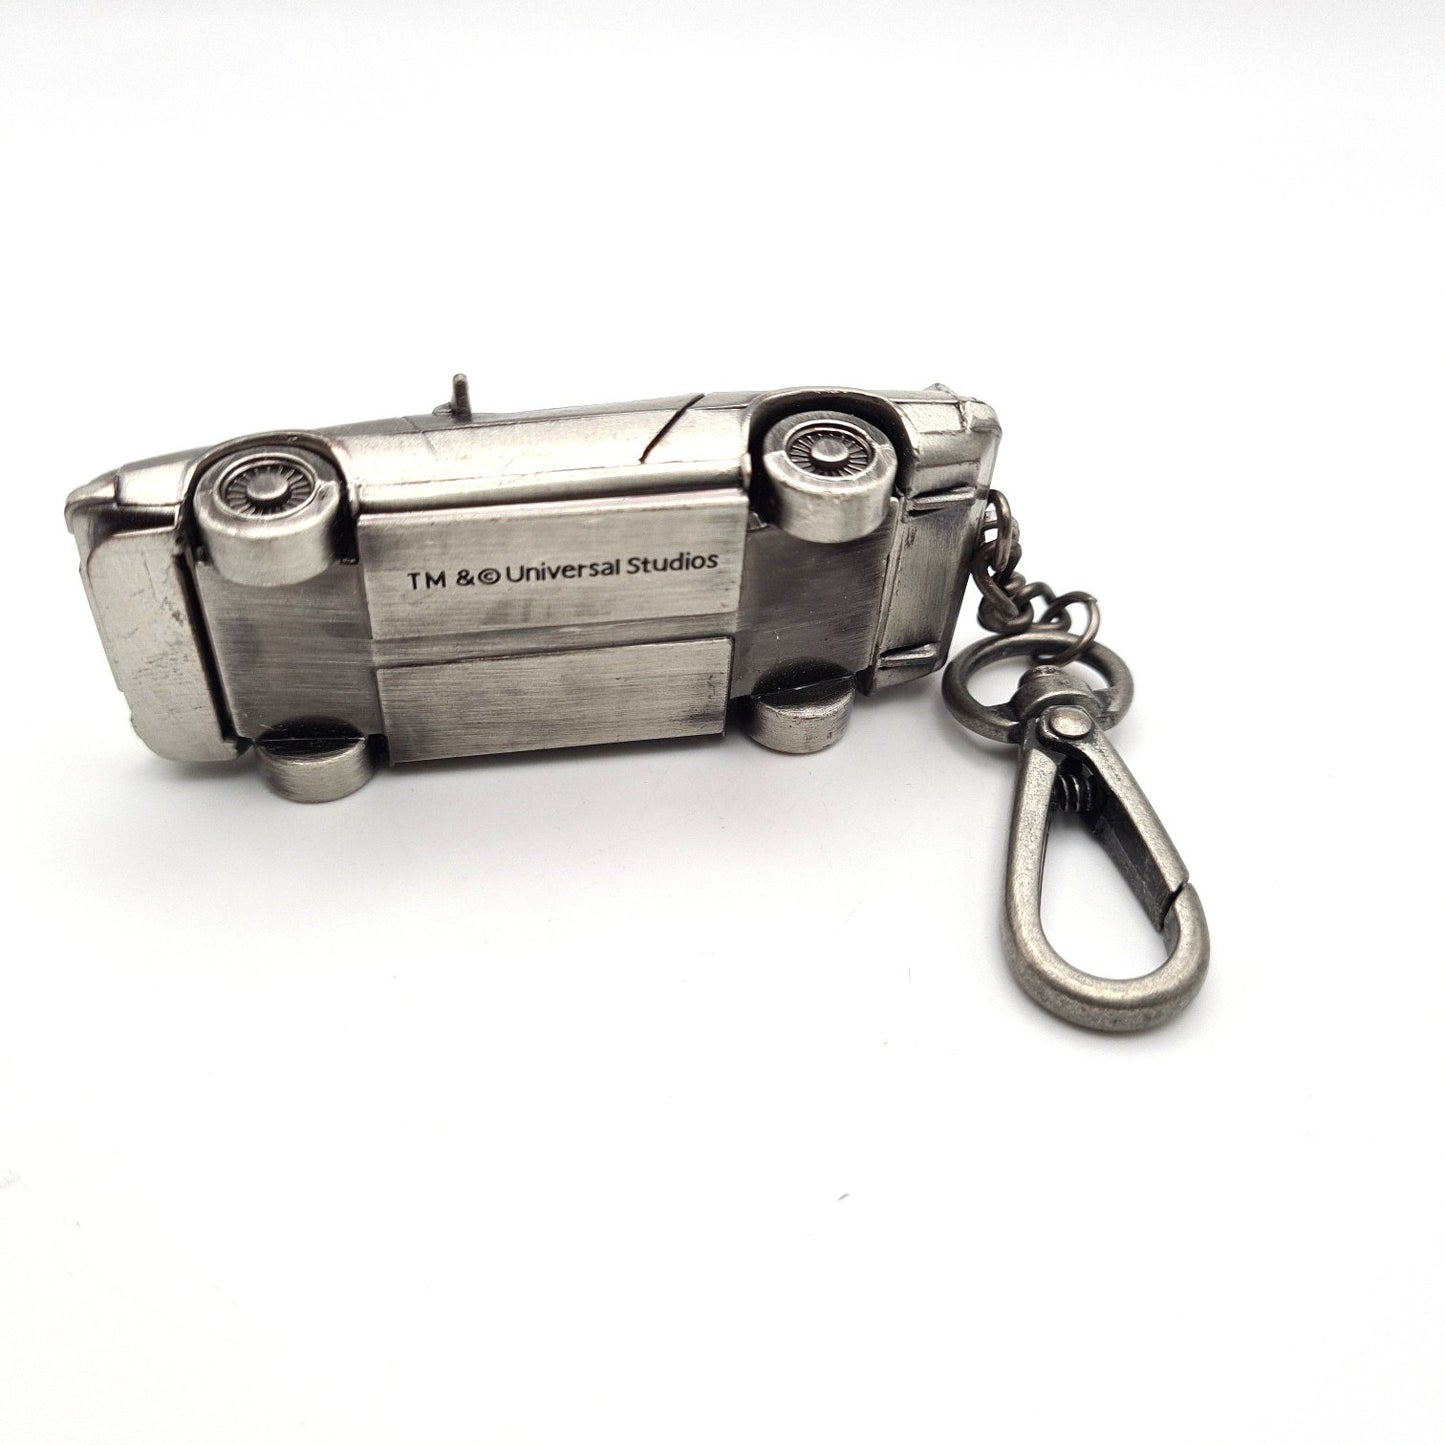 Back to the future - Delorian Keyring